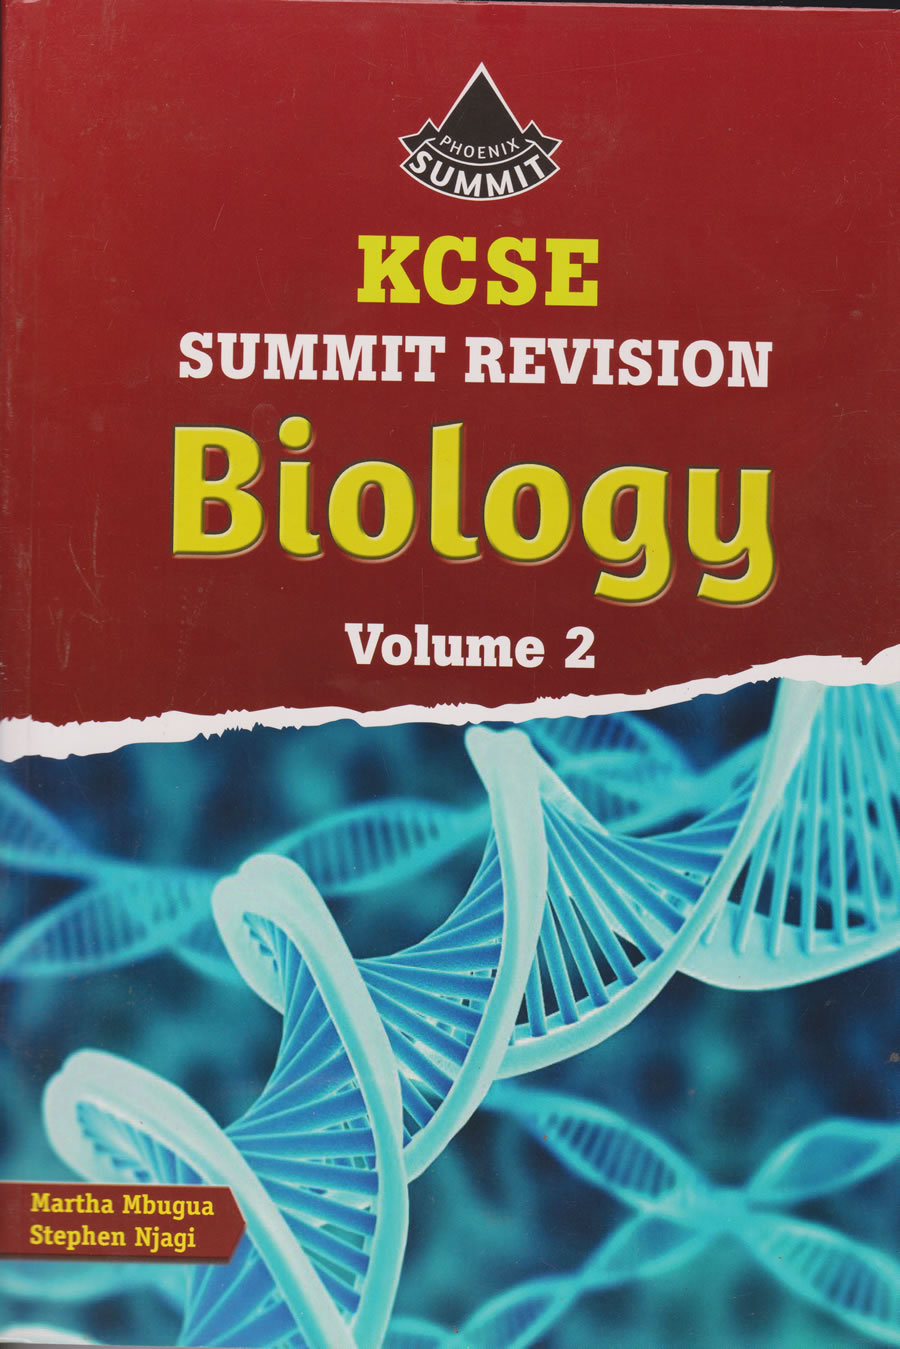 kcse biology essay questions and answers pdf